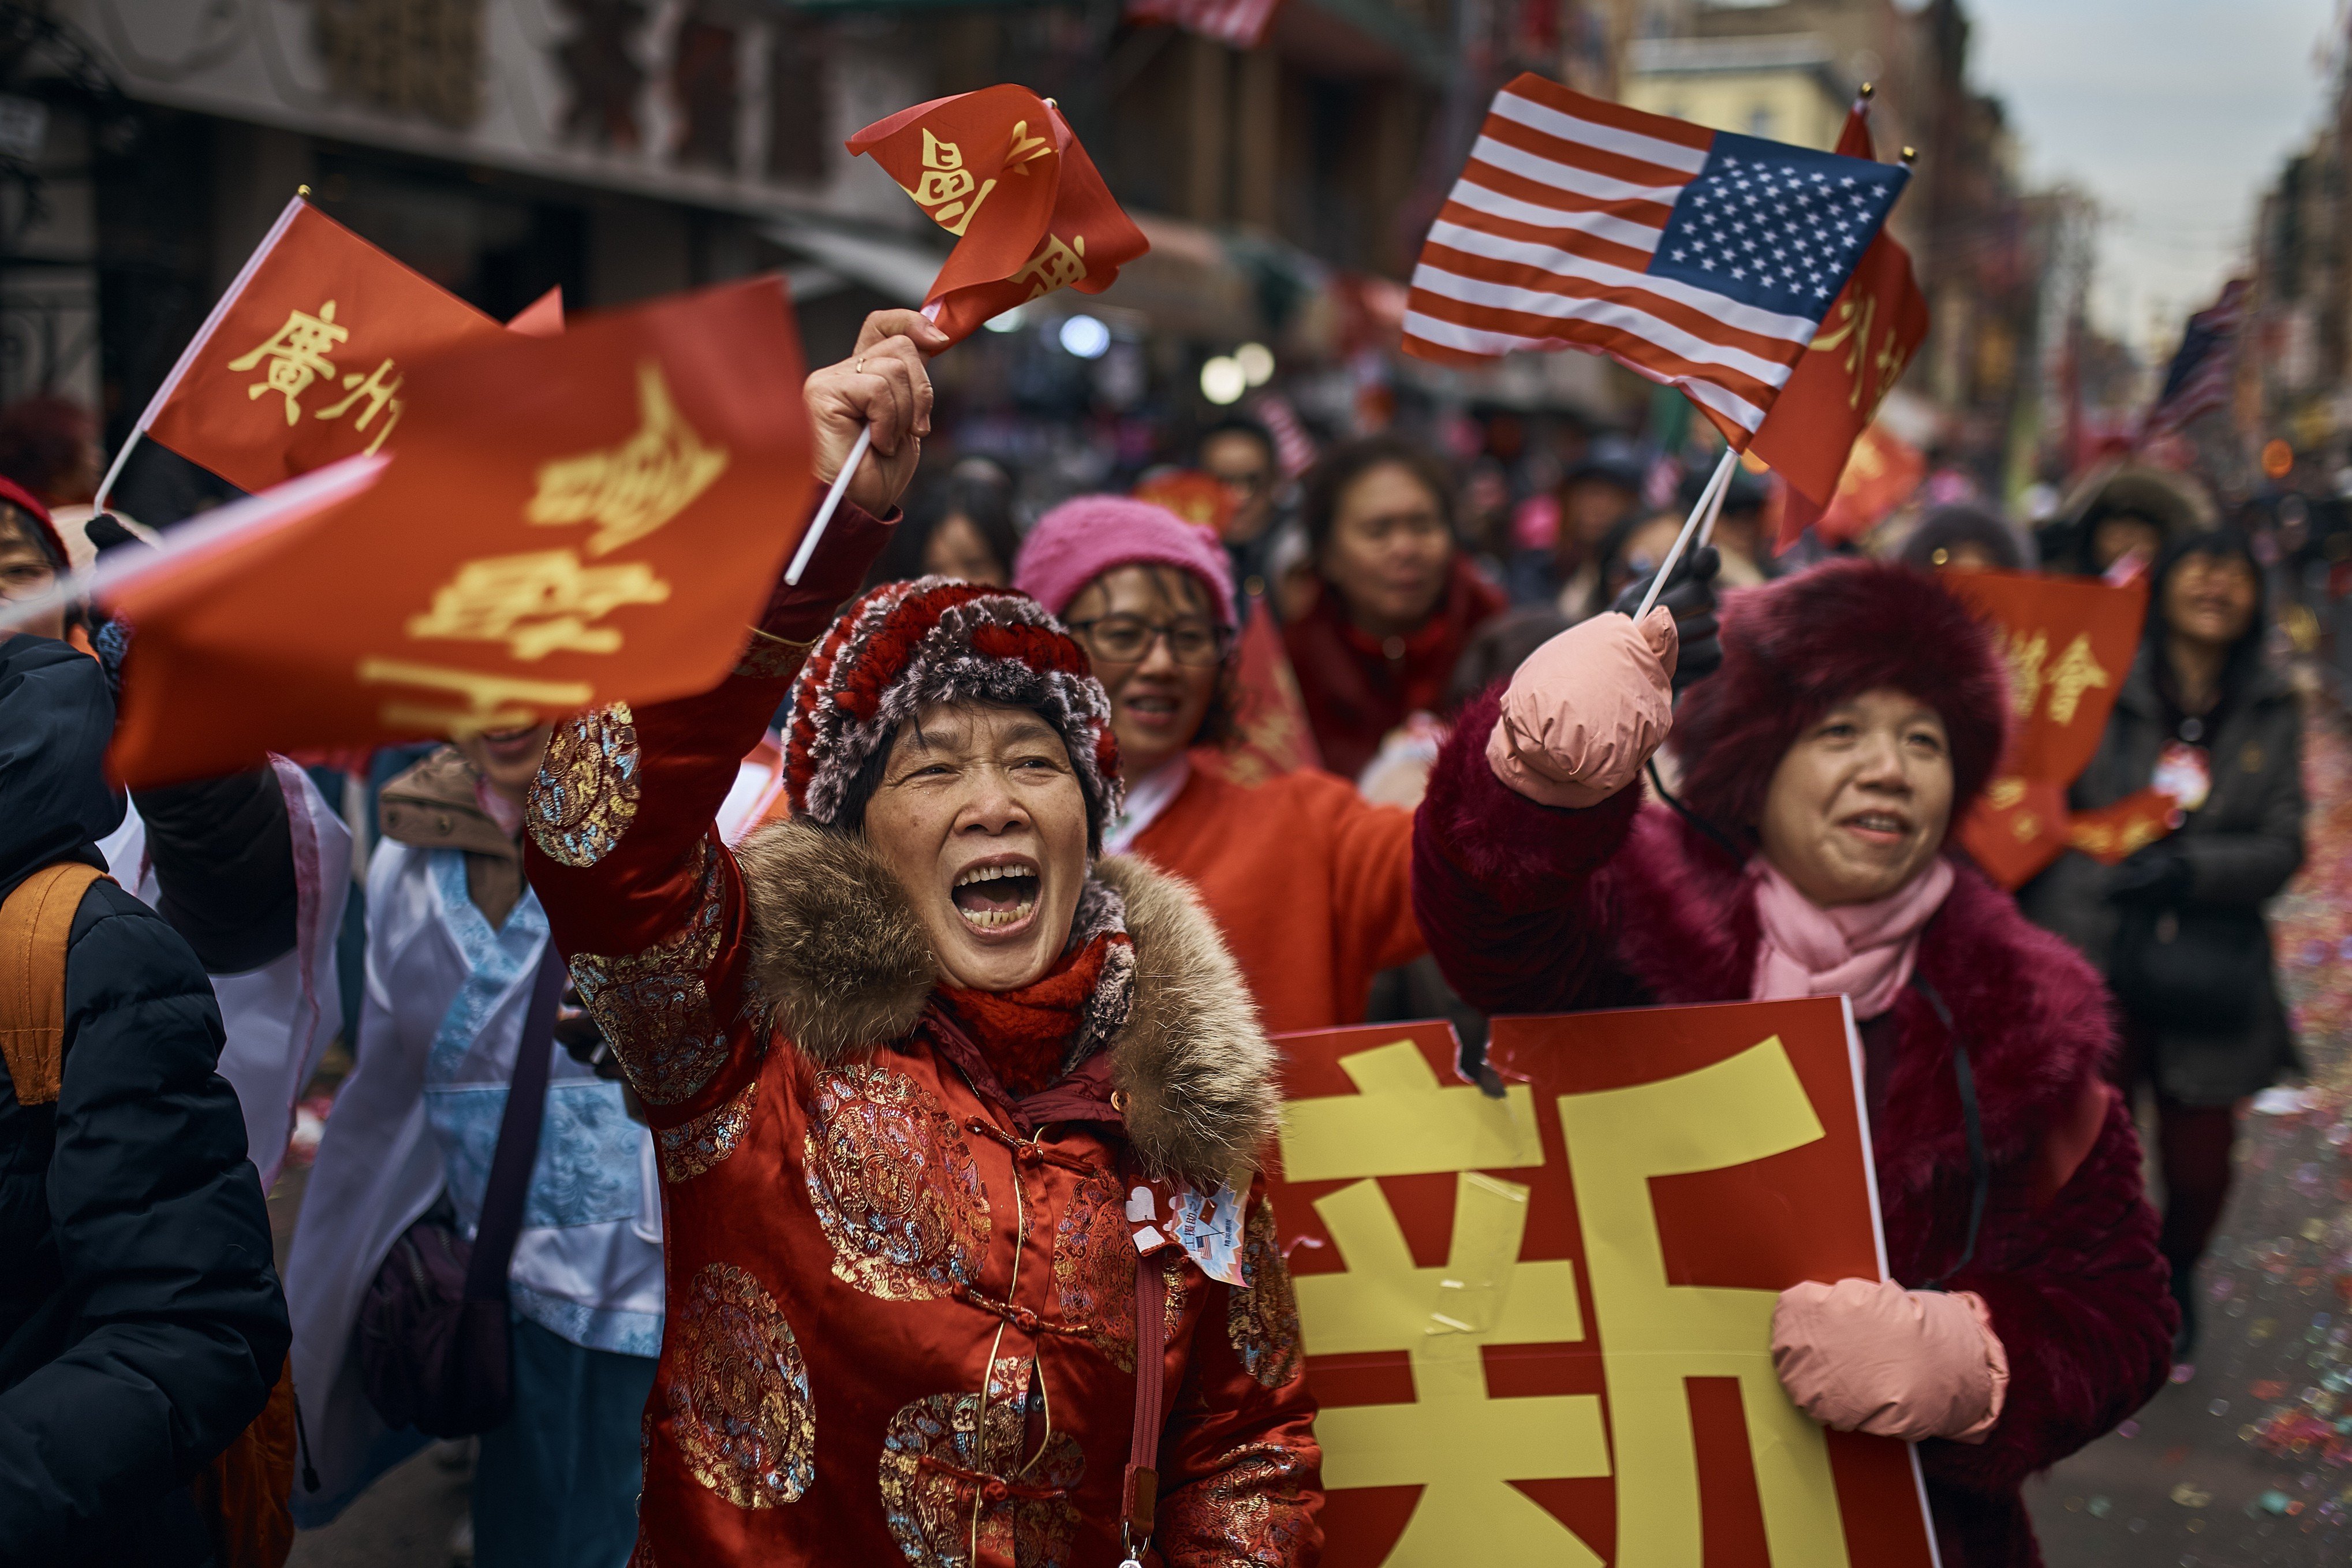 Revellers march and shout to the crowd during the Chinese Lunar New Year parade in Chinatown in New York. Photo: AP Photo